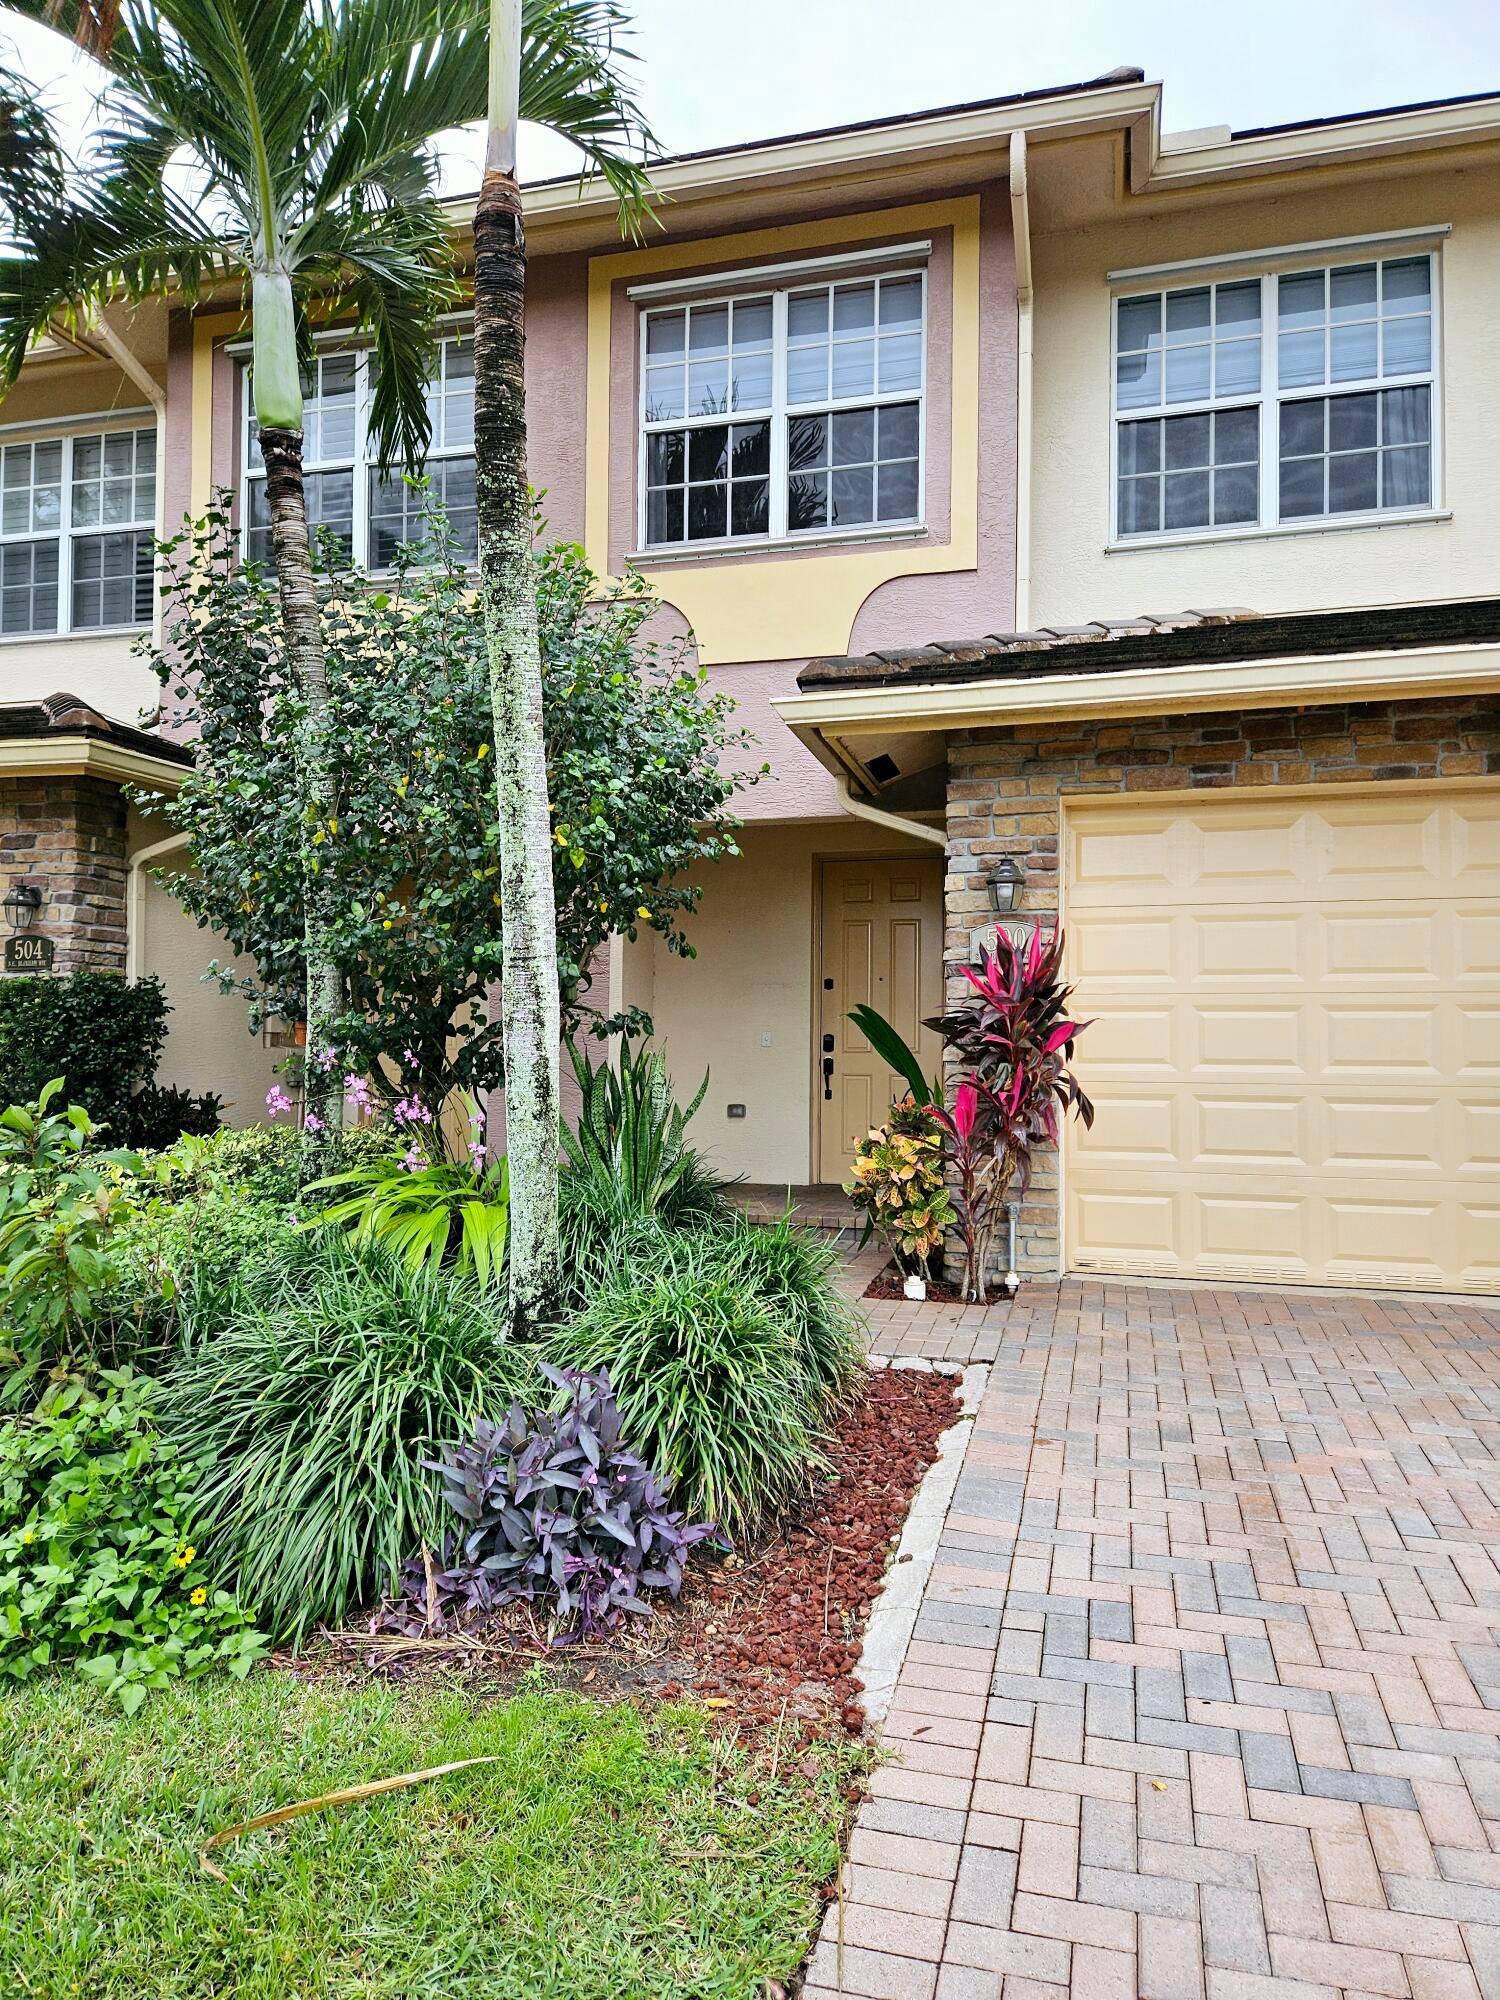 Great townhouse at a great price in Stuart Florida.